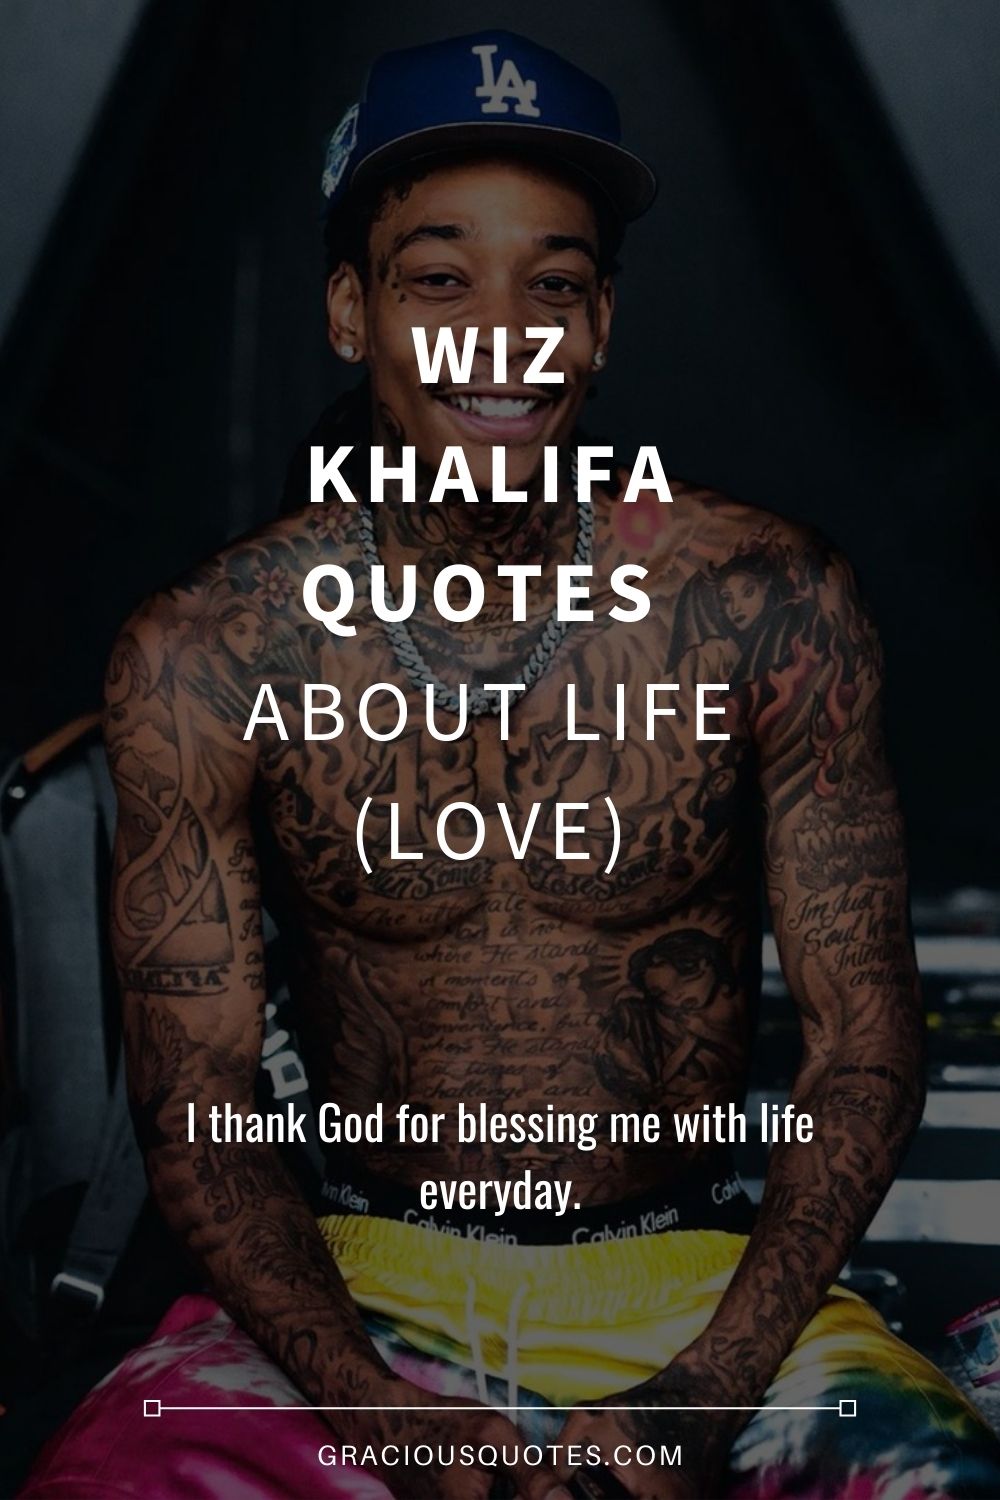 Wiz Khalifa Quotes About Life (LOVE) - Gracious Quotes